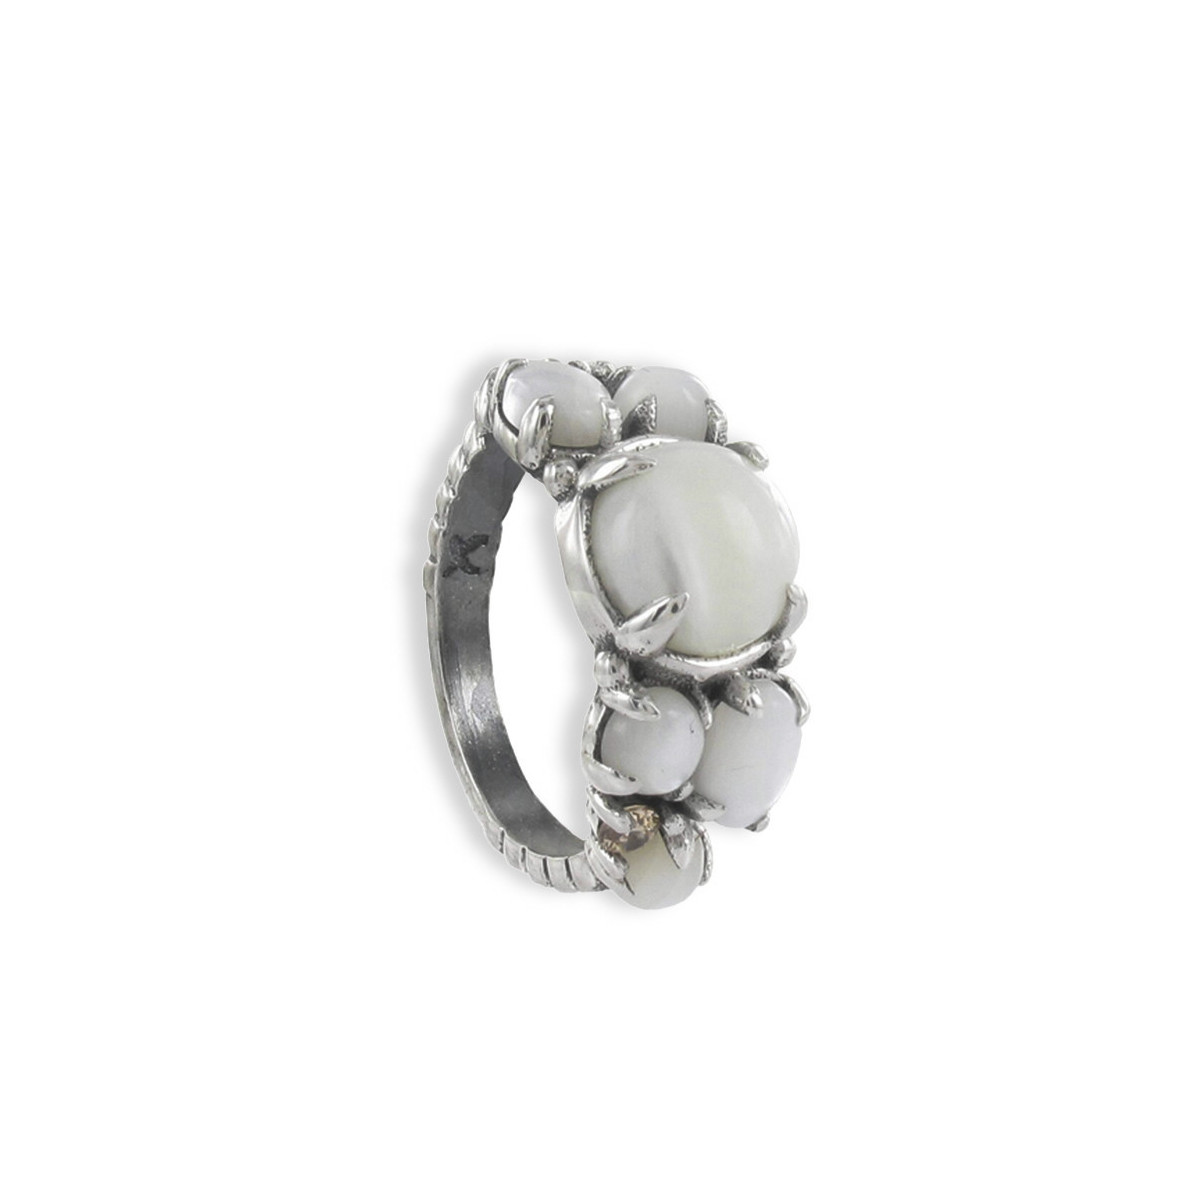 SILVER RING WITH MOTHER-OF-PEARL PARTS